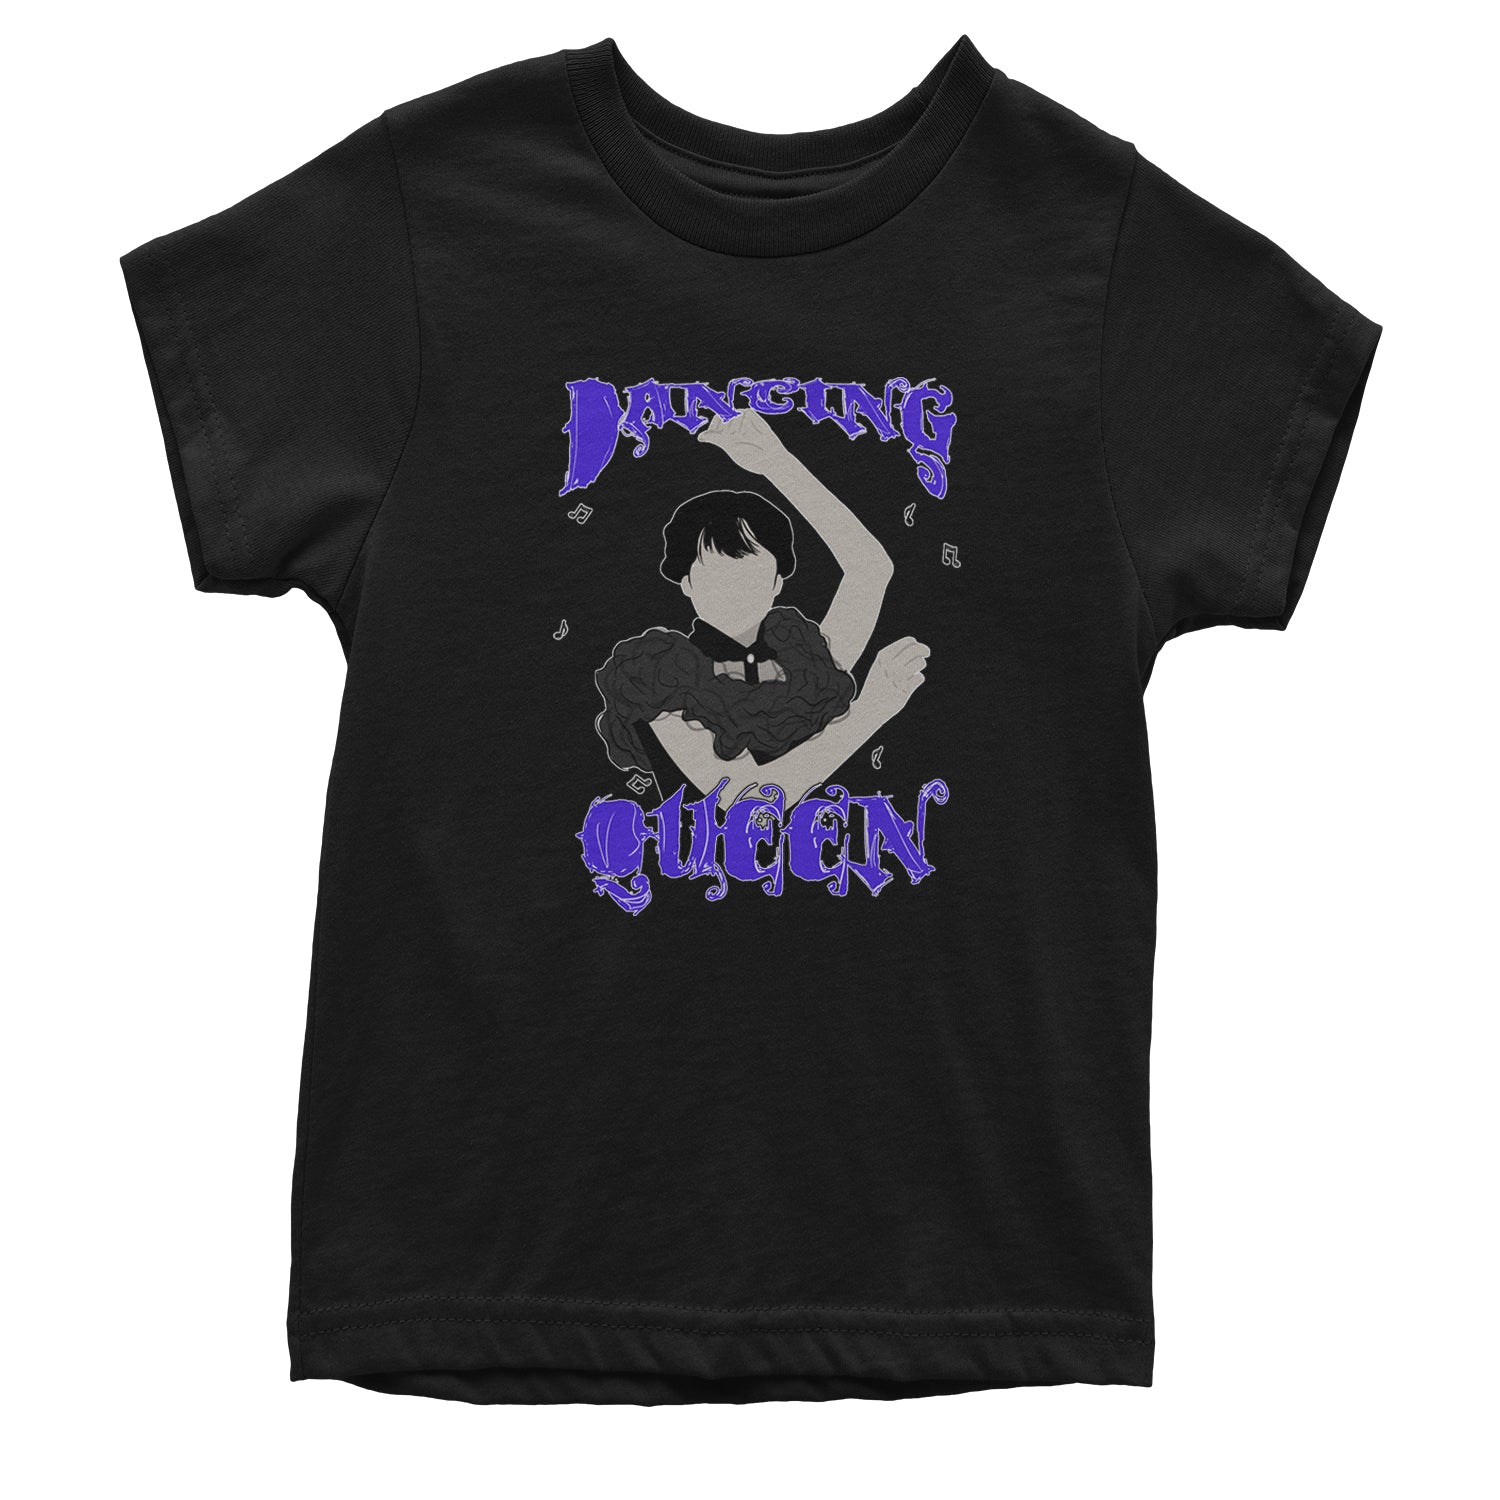 Wednesday Dancing Queen Youth T-shirt black, On, we, wear, wednesdays by Expression Tees